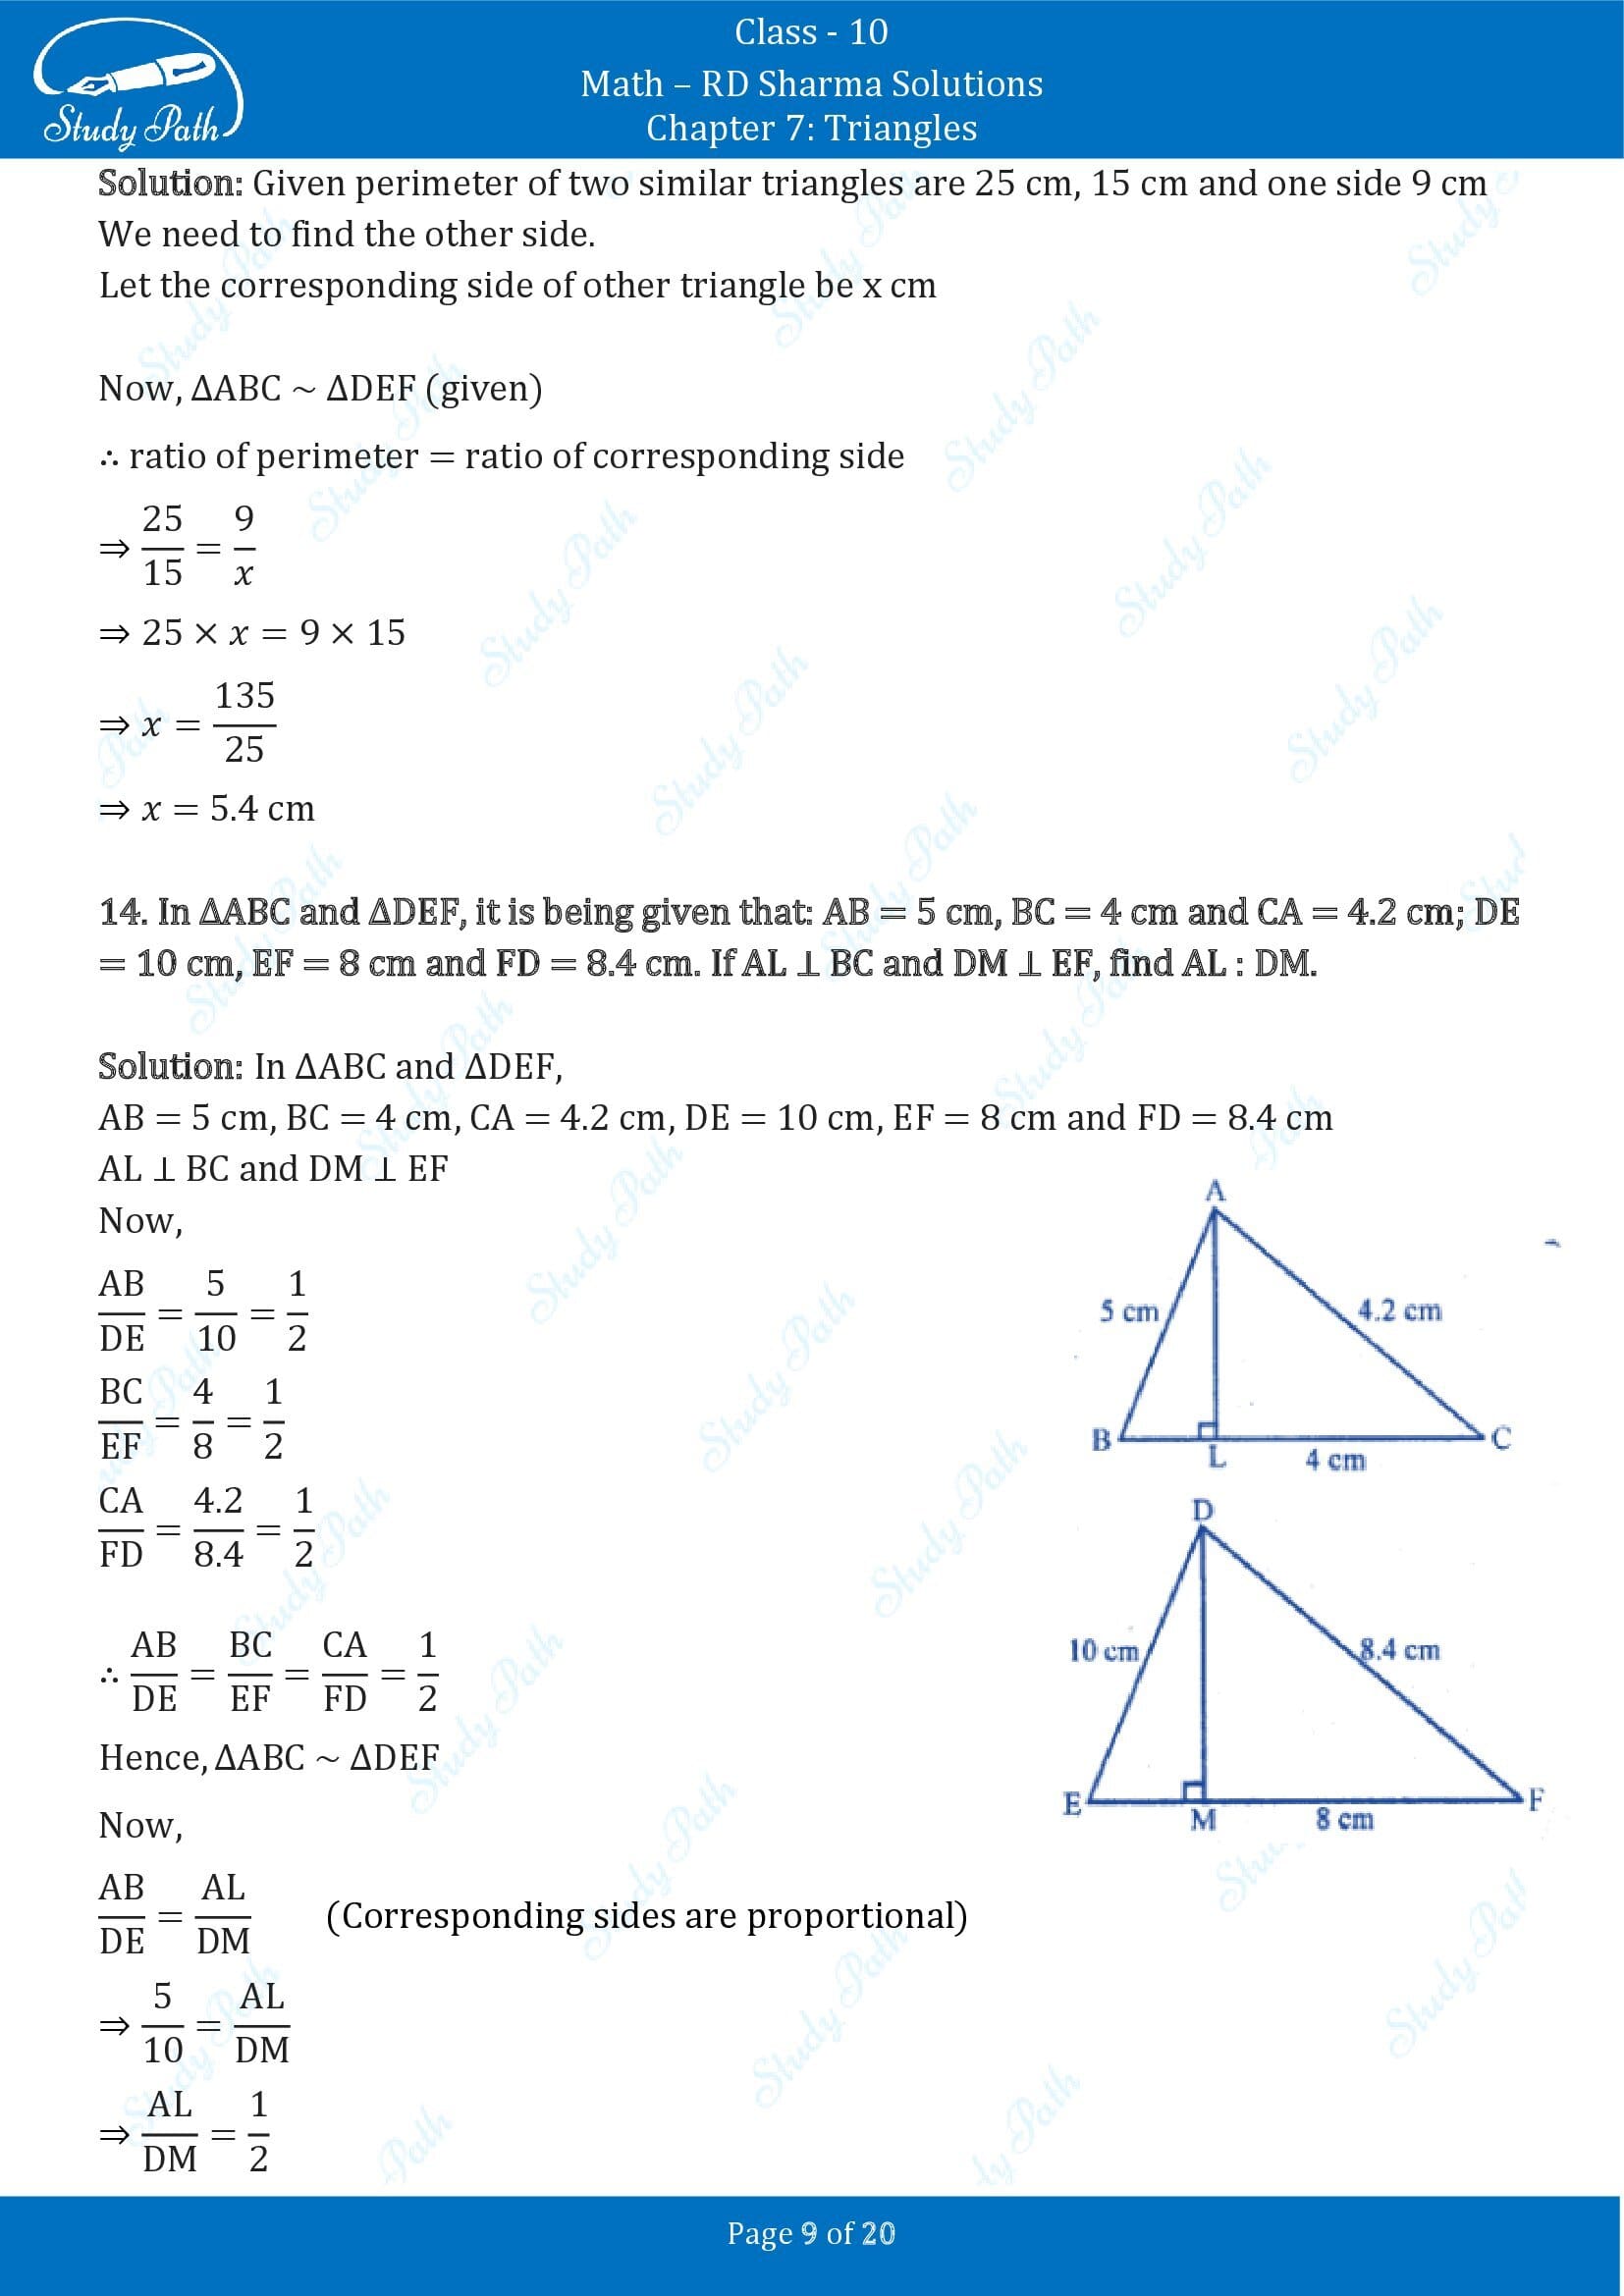 RD Sharma Solutions Class 10 Chapter 7 Triangles Exercise 7.5 00009